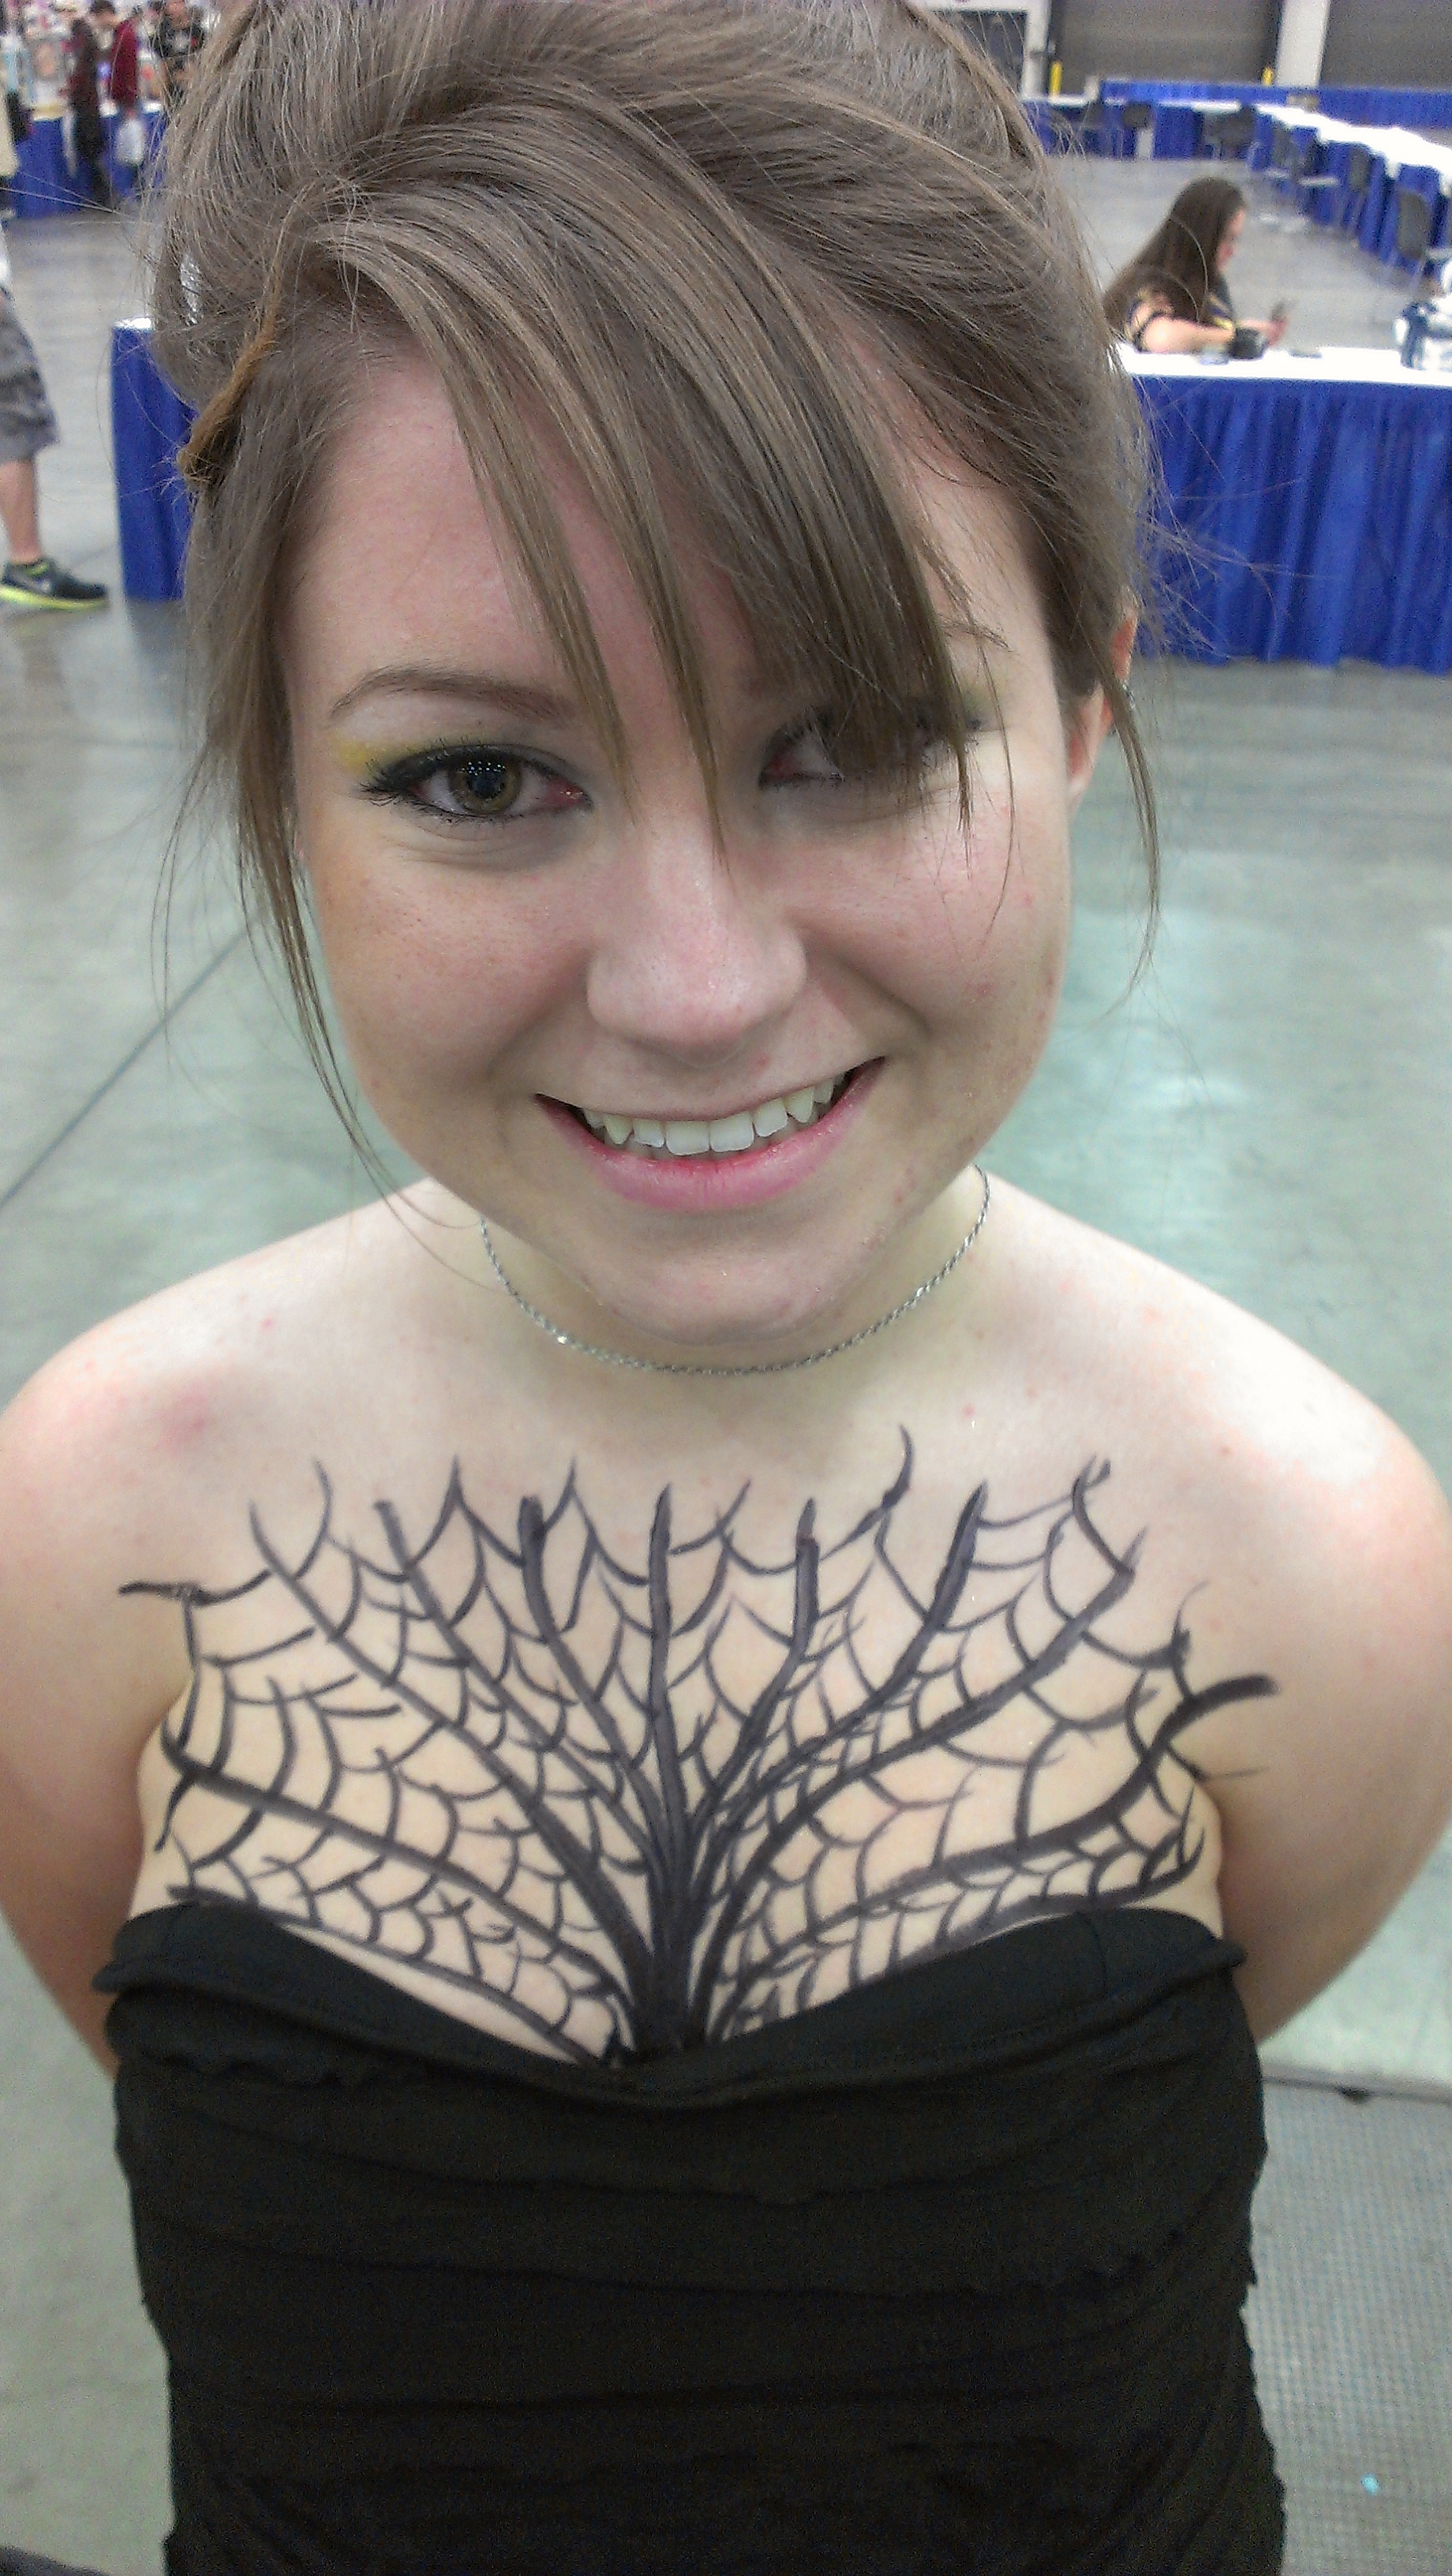 Spider Web Tattoos Designs, Ideas and Meaning - Tattoos For You